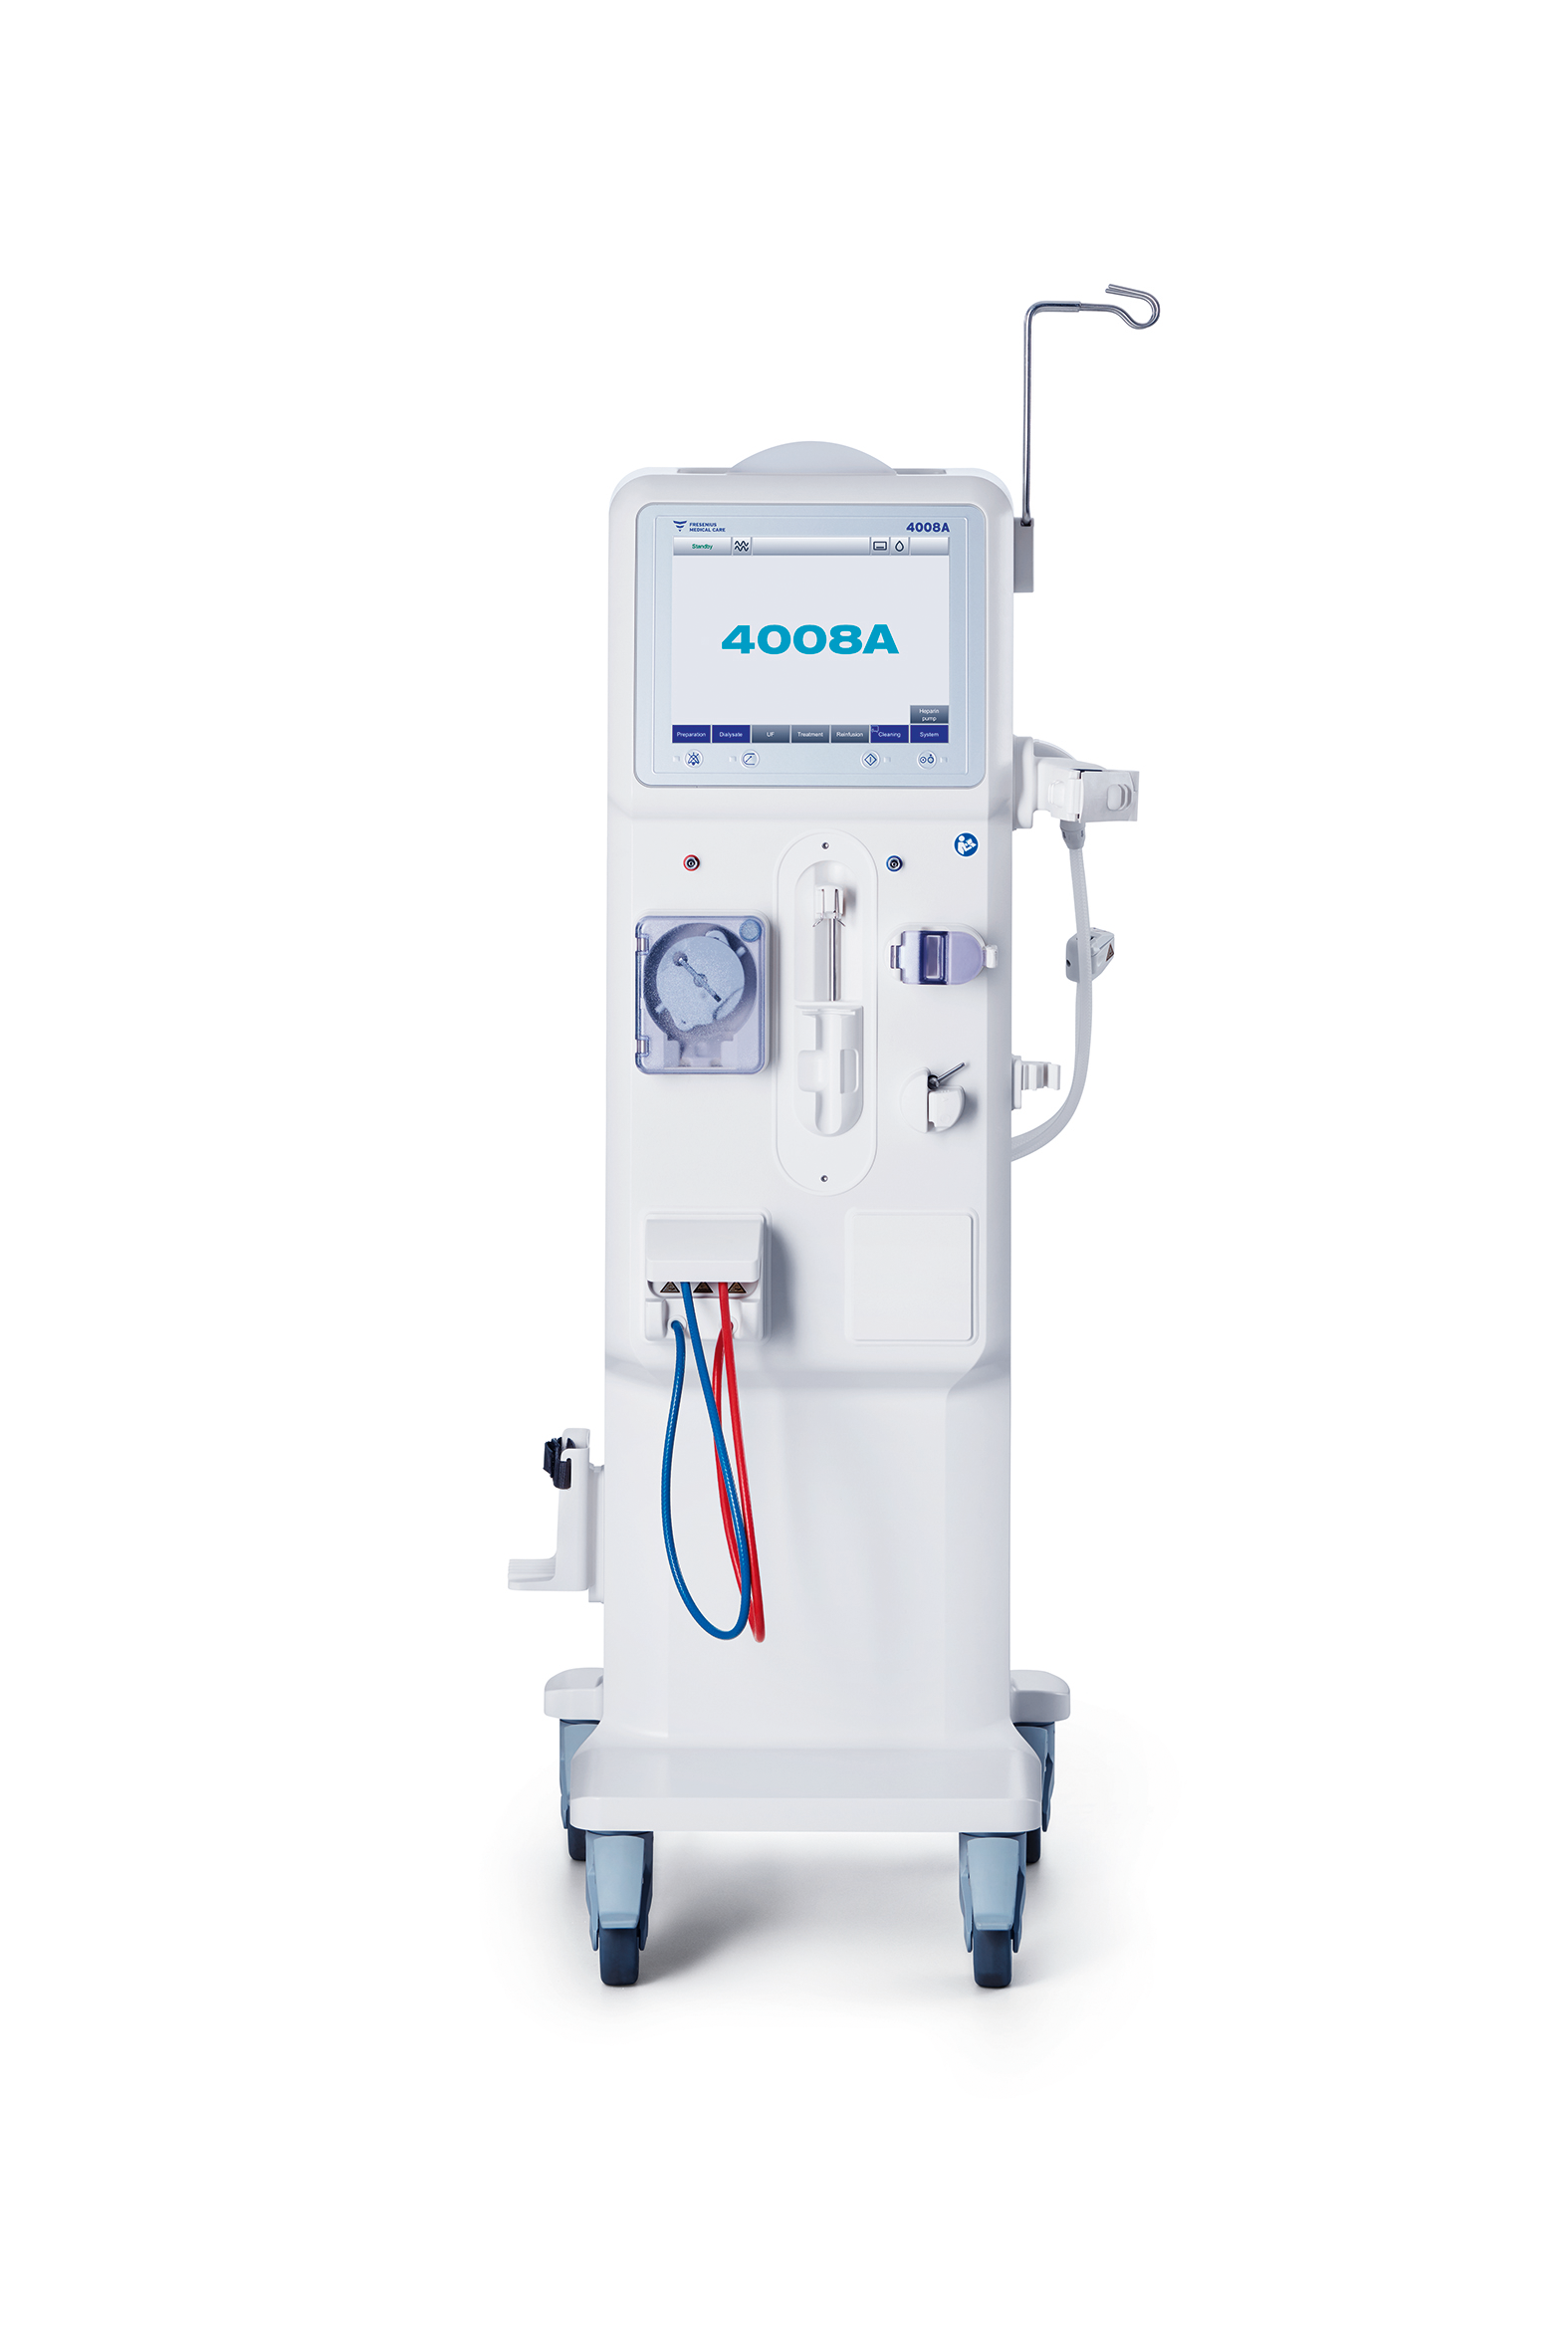 [Translate to German:] Fresenius Medical Care In-center dialysis | 4008A machine